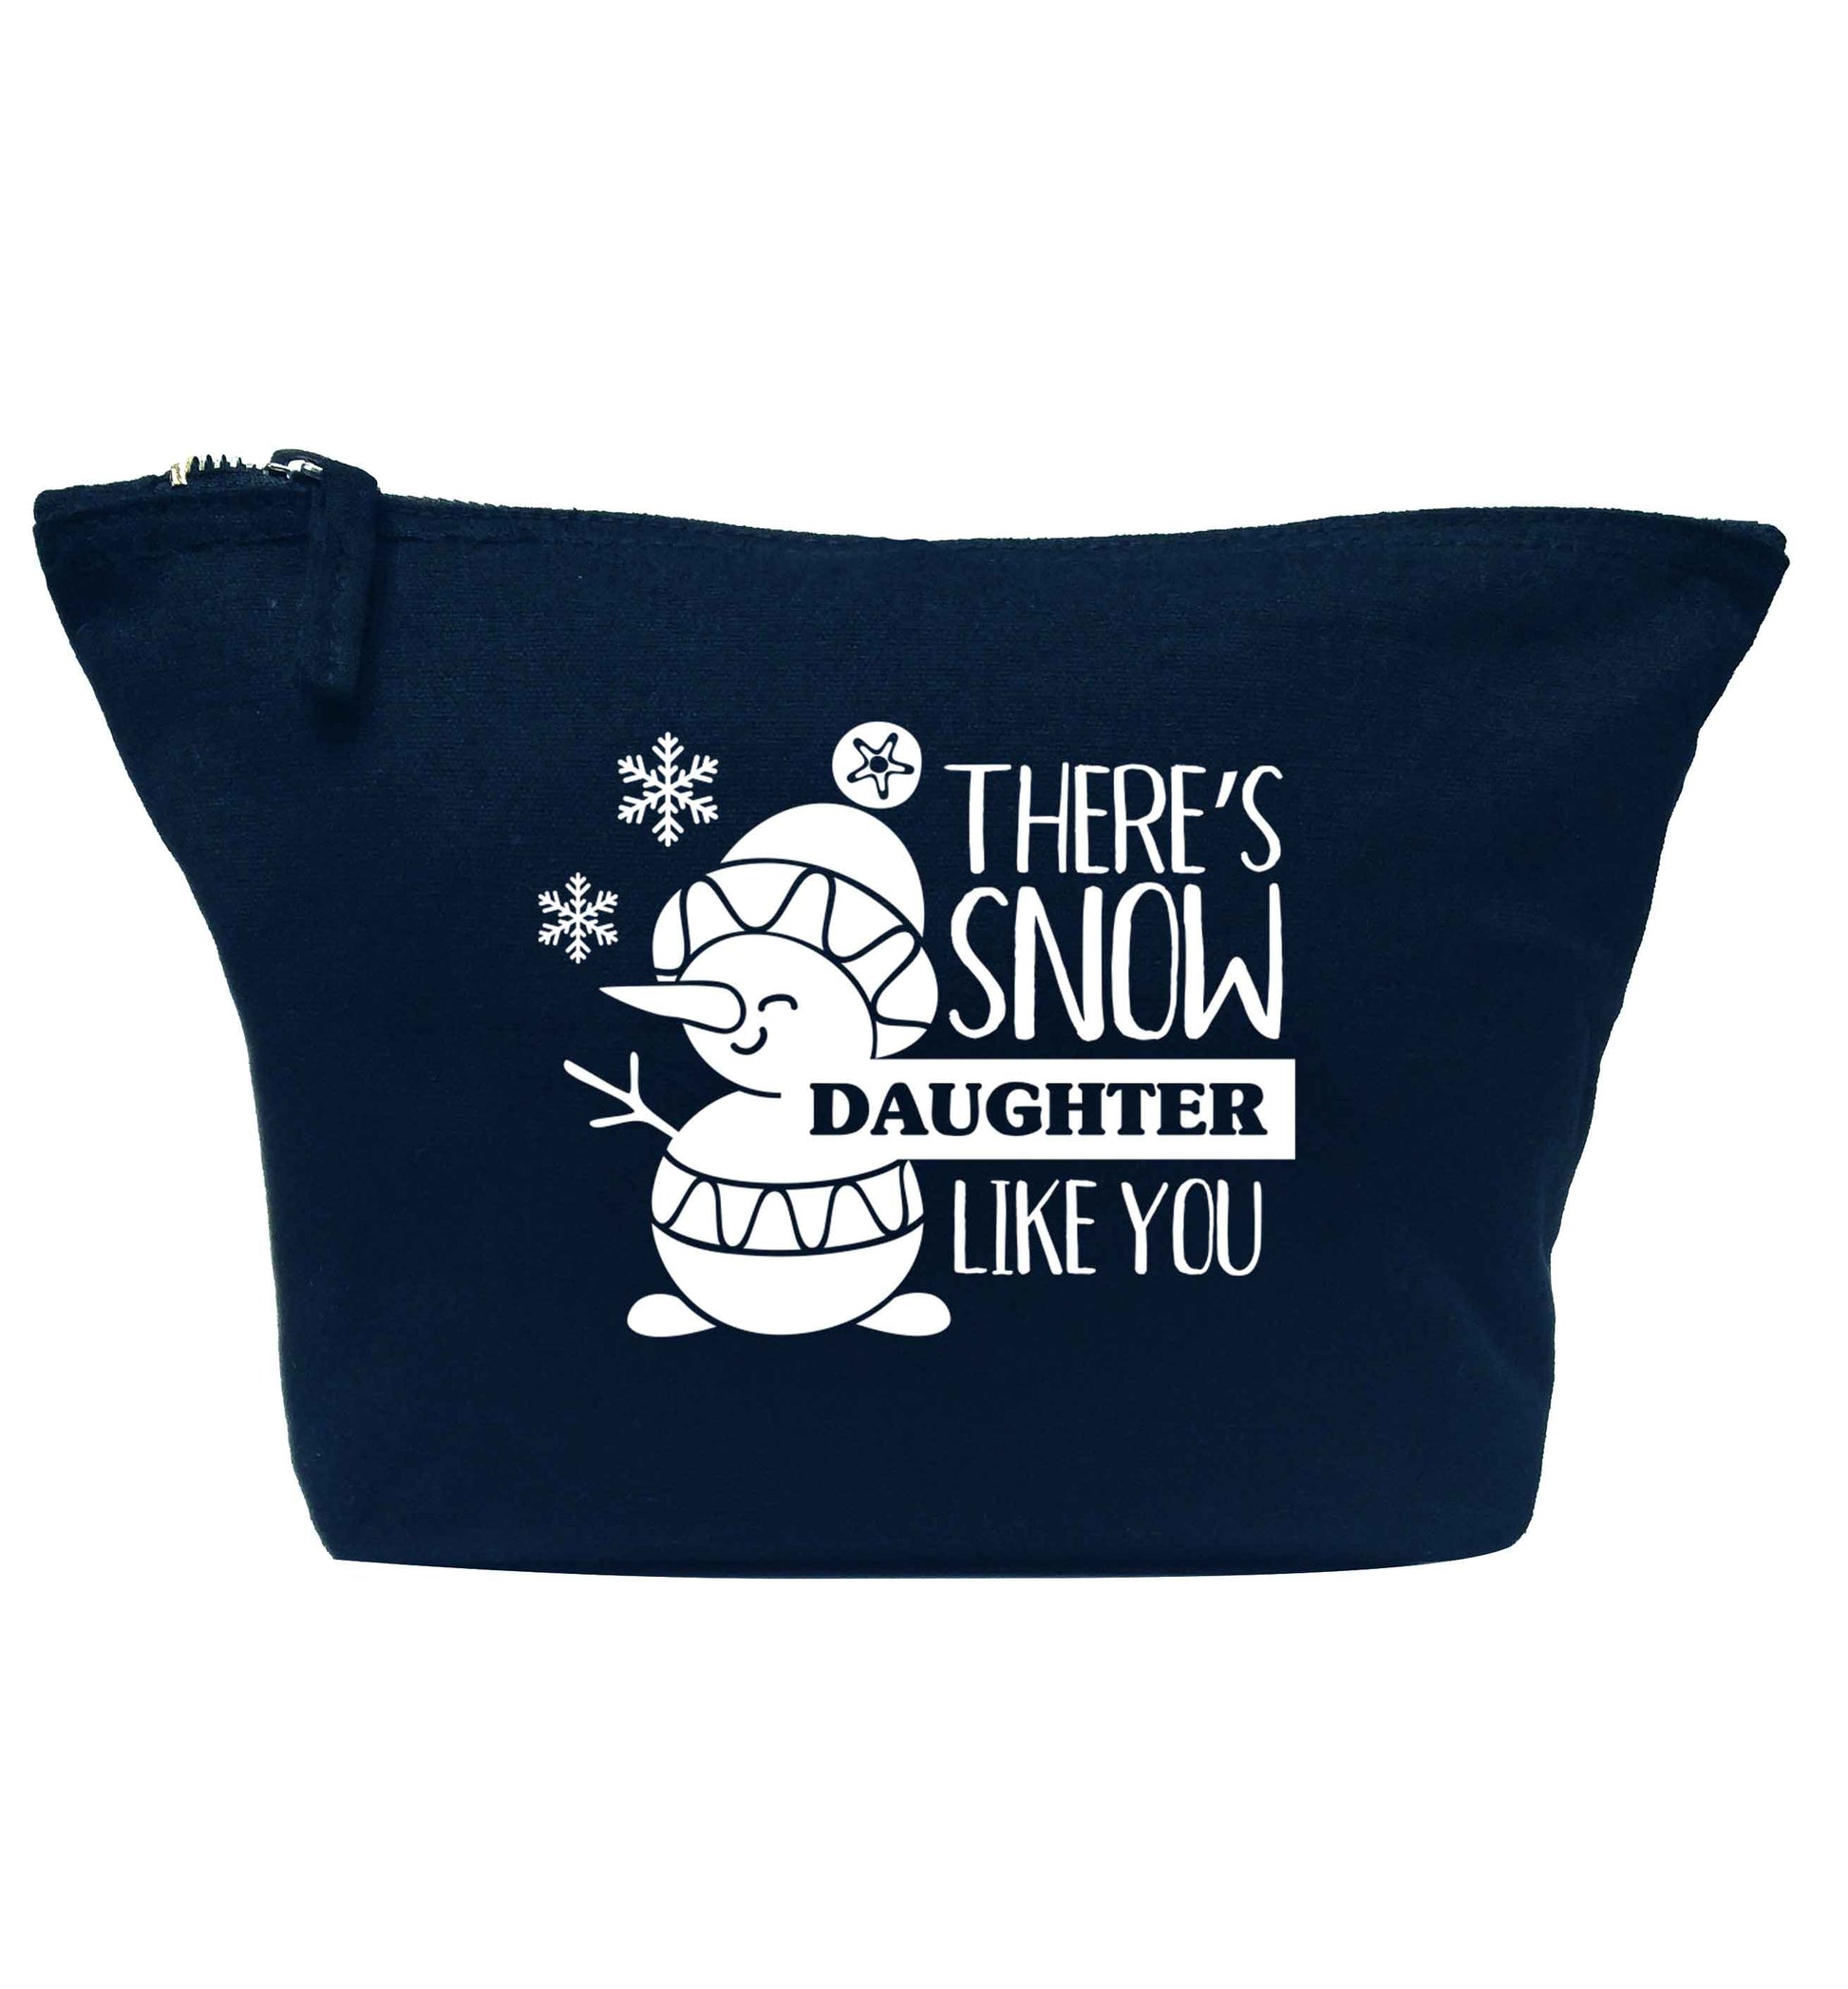 There's snow daughter like you navy makeup bag